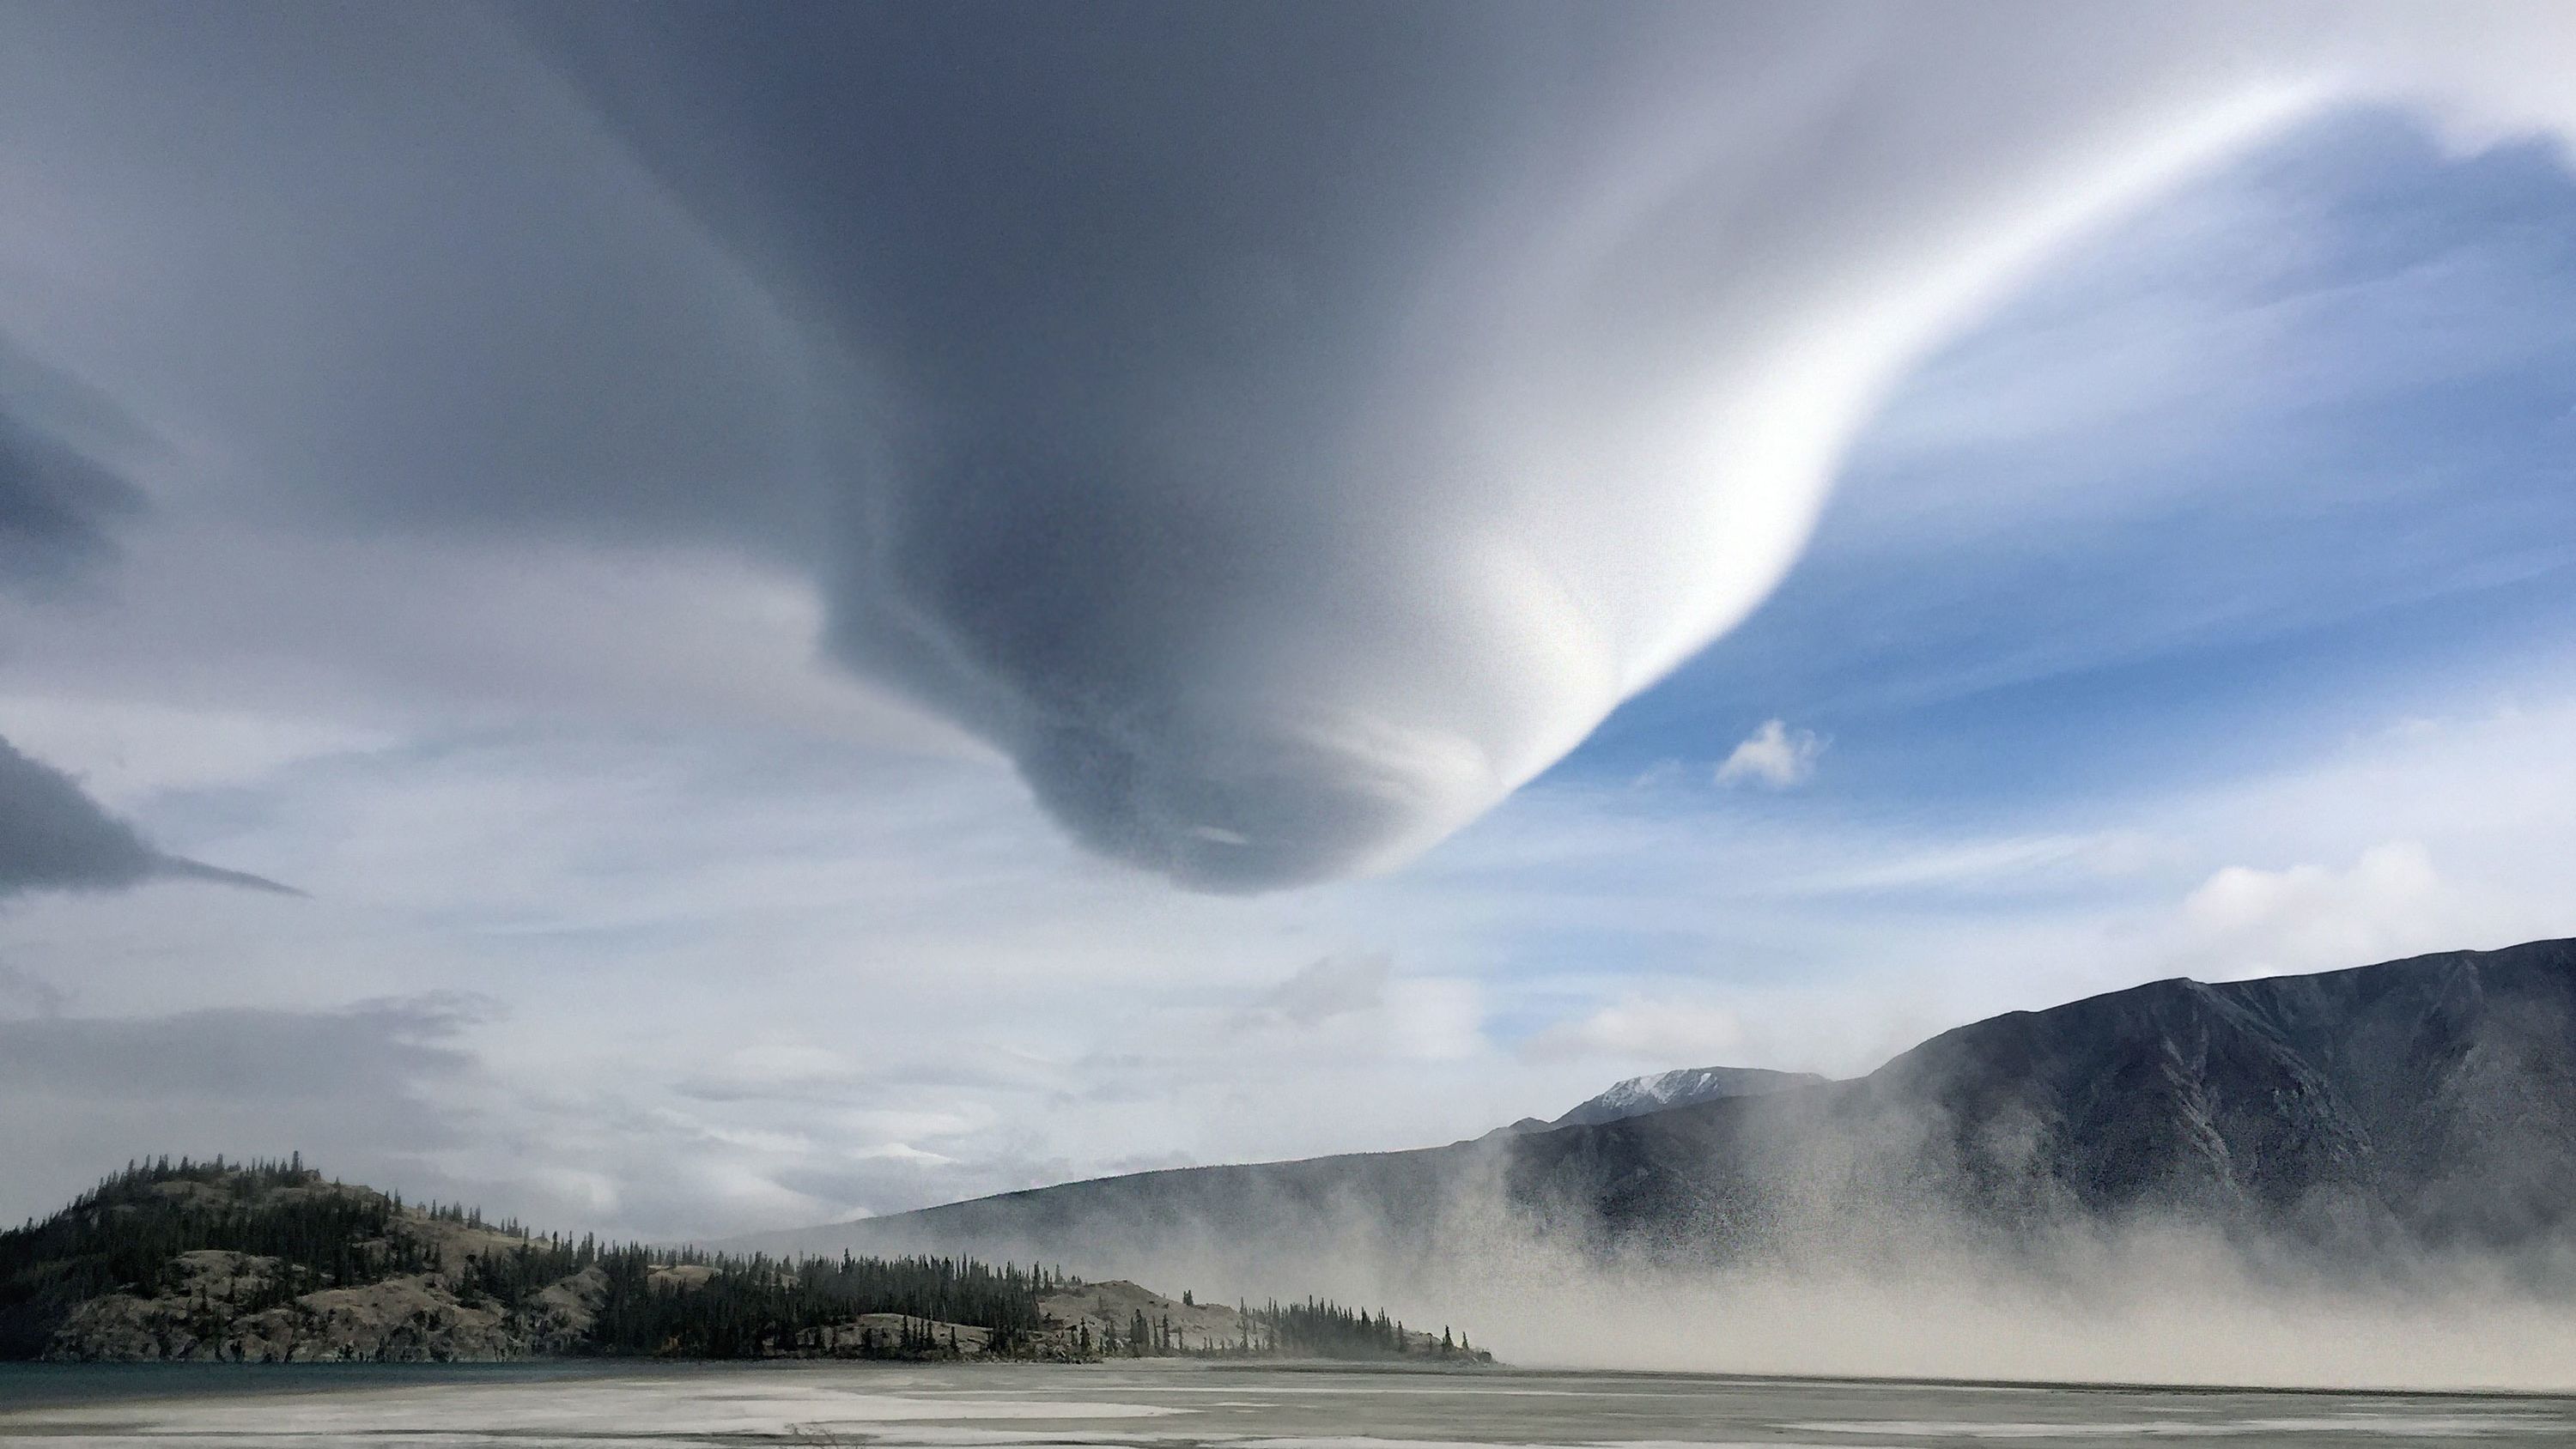 Lauren Marchant's "Twister in the Yukon" shows a large funnel cloud in the Yukon, Canada.